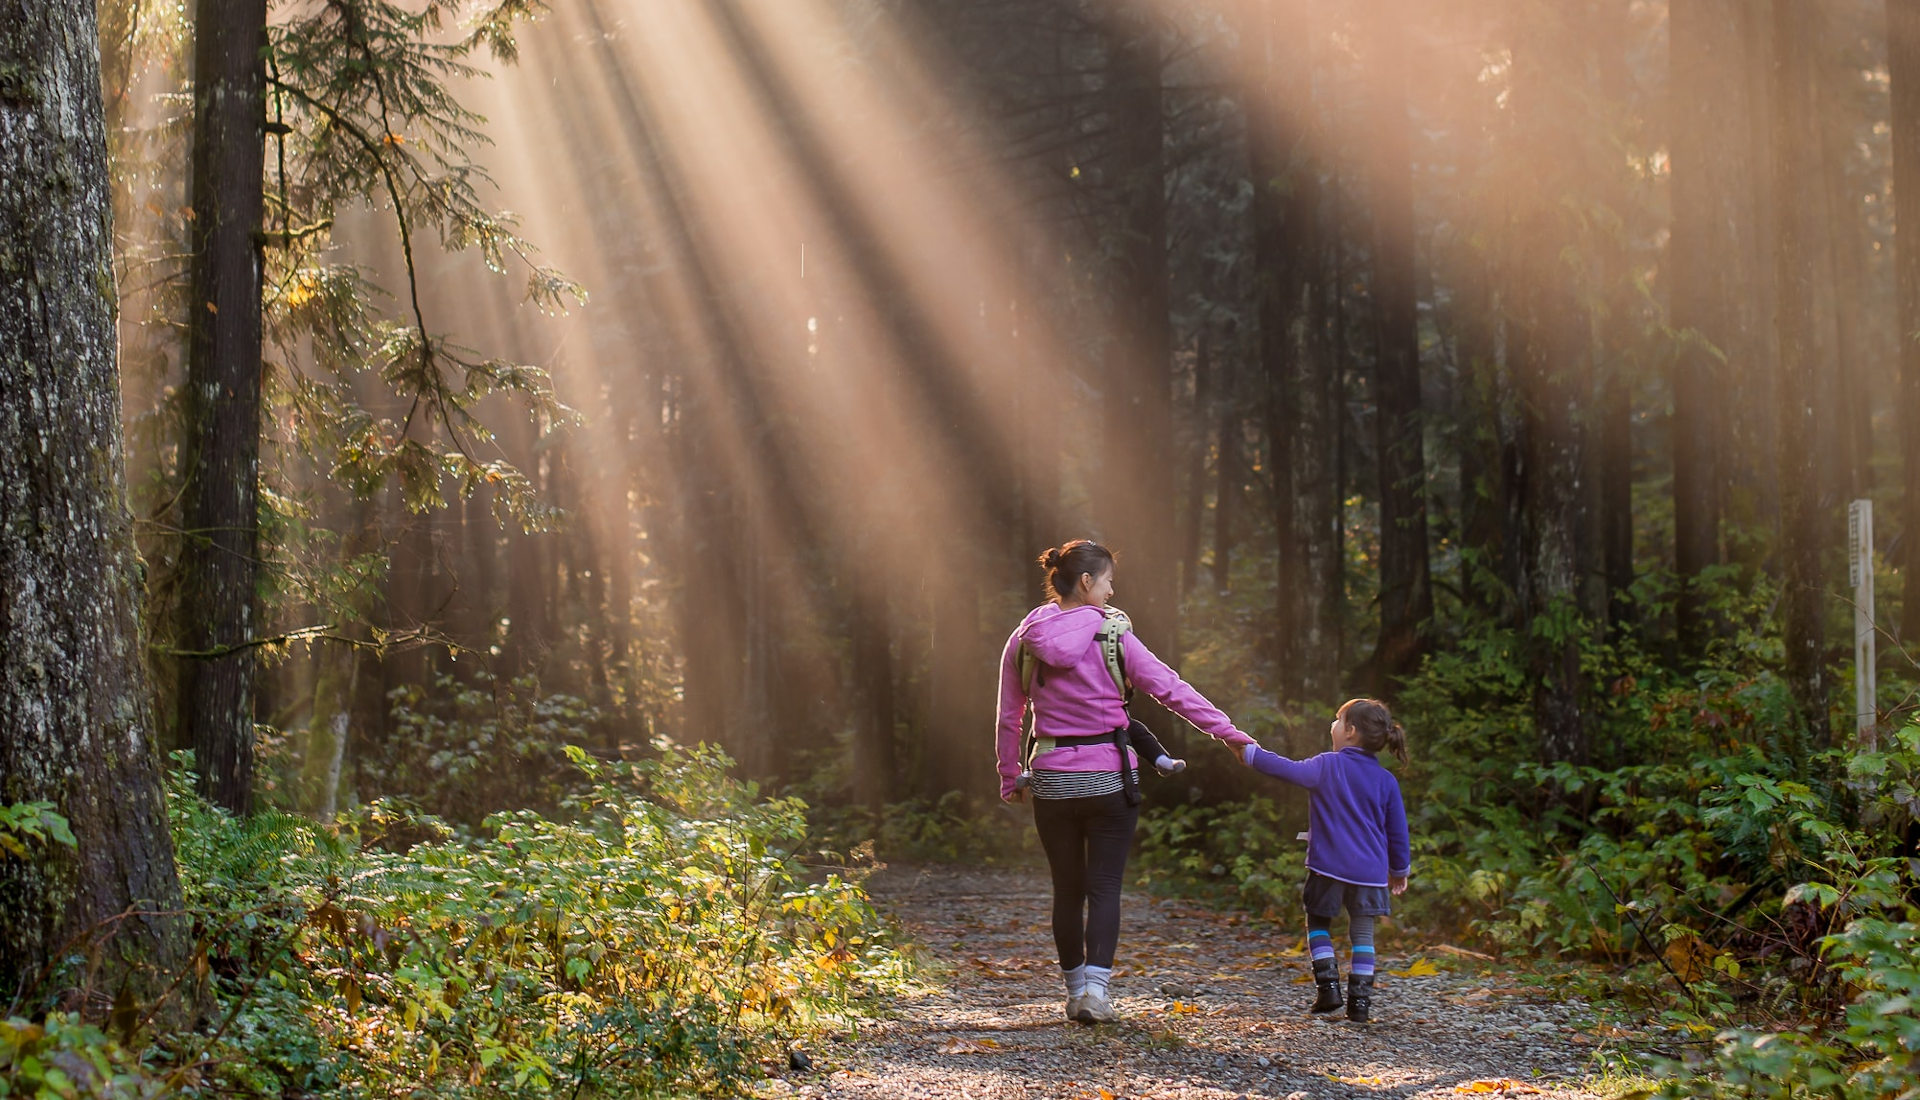 Women and child walking through woodland with rays of light shining through trees